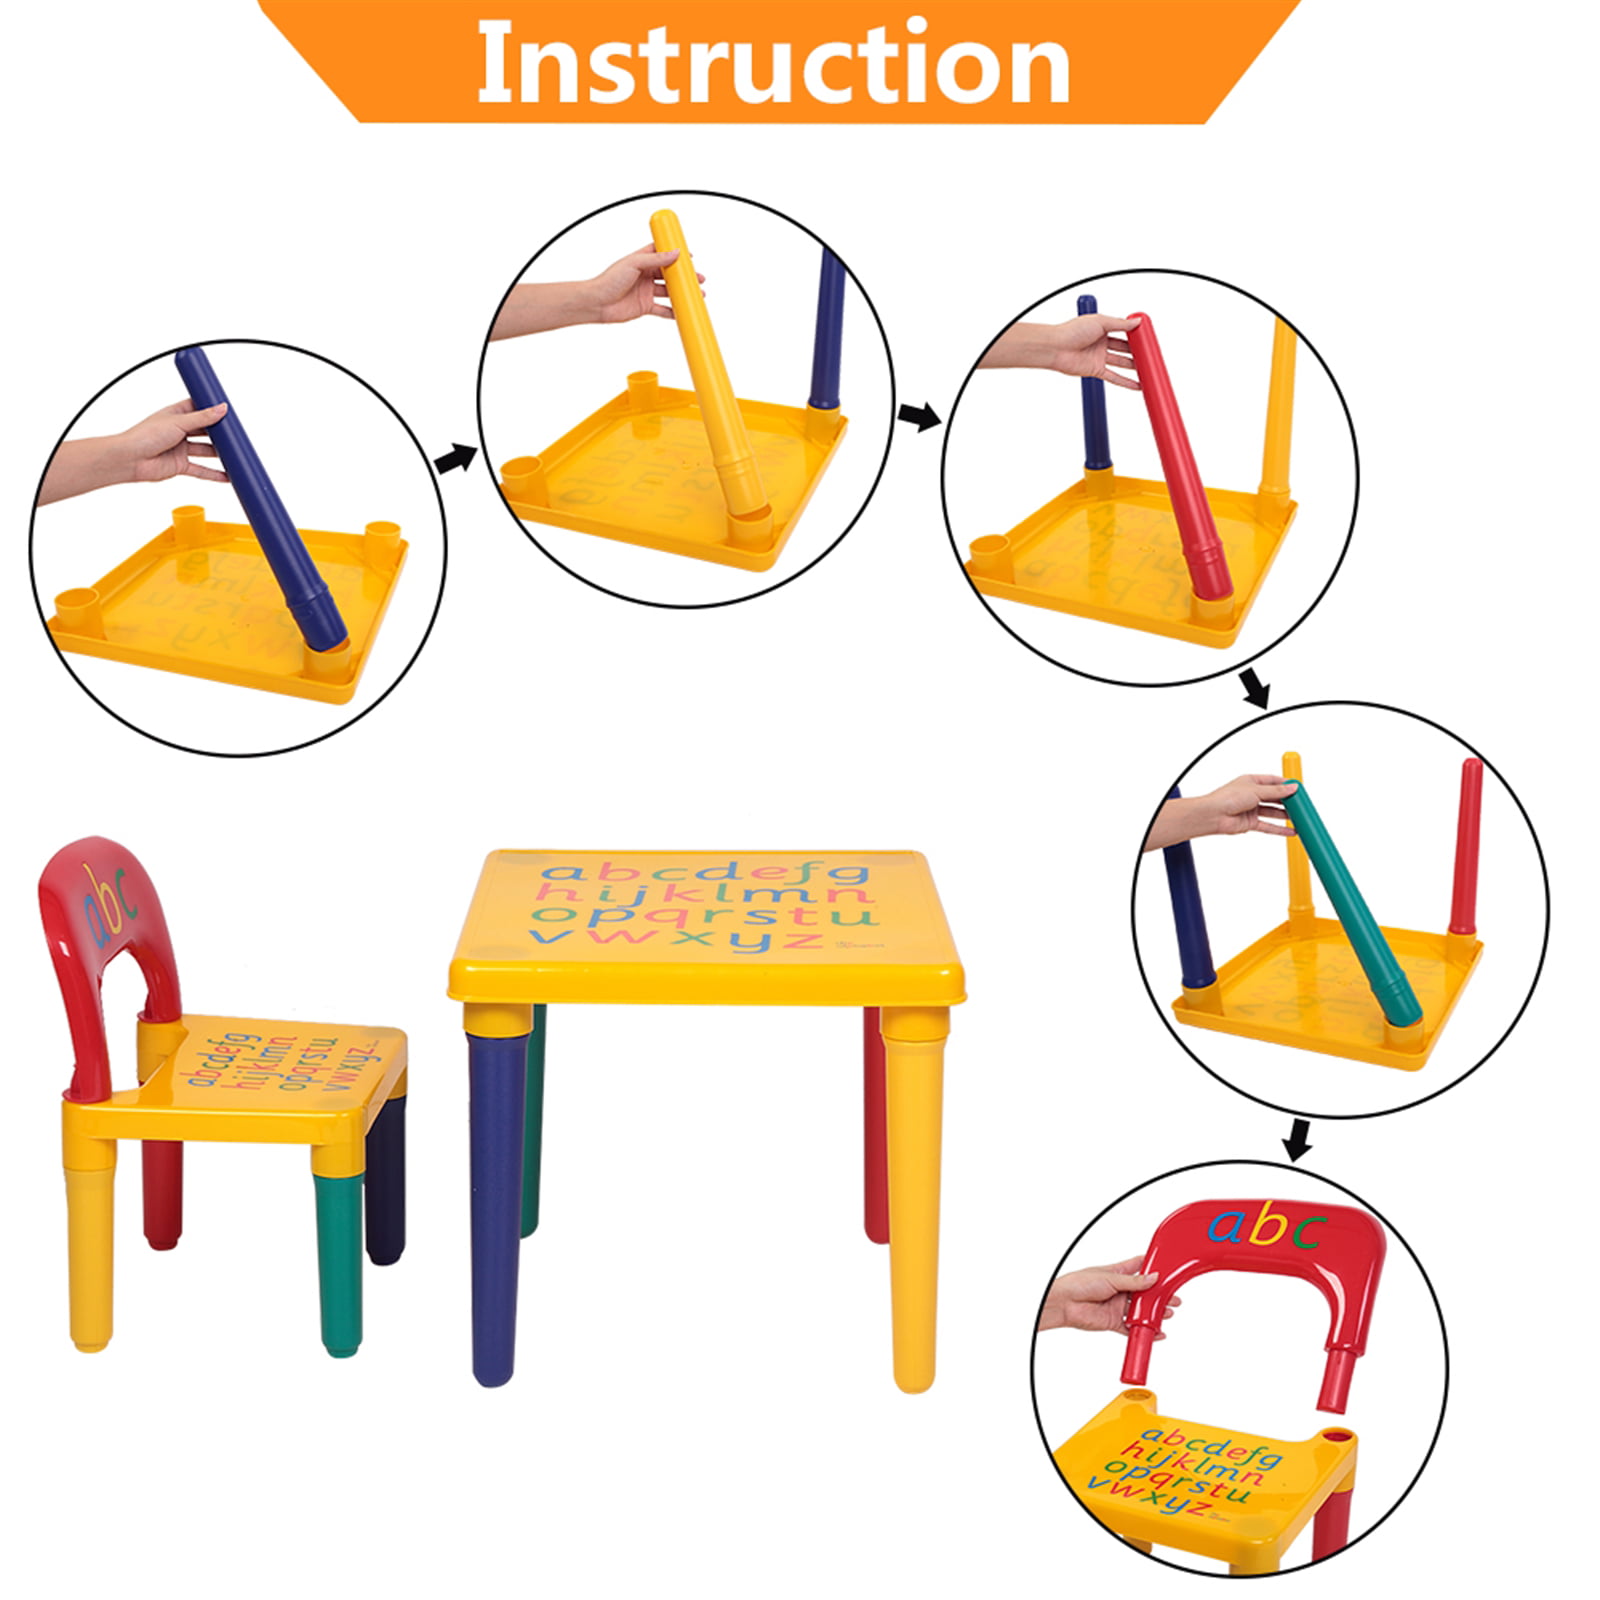 Alphabetic Letter Learn & Play Detachable Table Chair Activity Set Educational Gift for Toddler Kids Children Students Home Bedroom Play Room Ejoyous Kids Table and Chair Set 